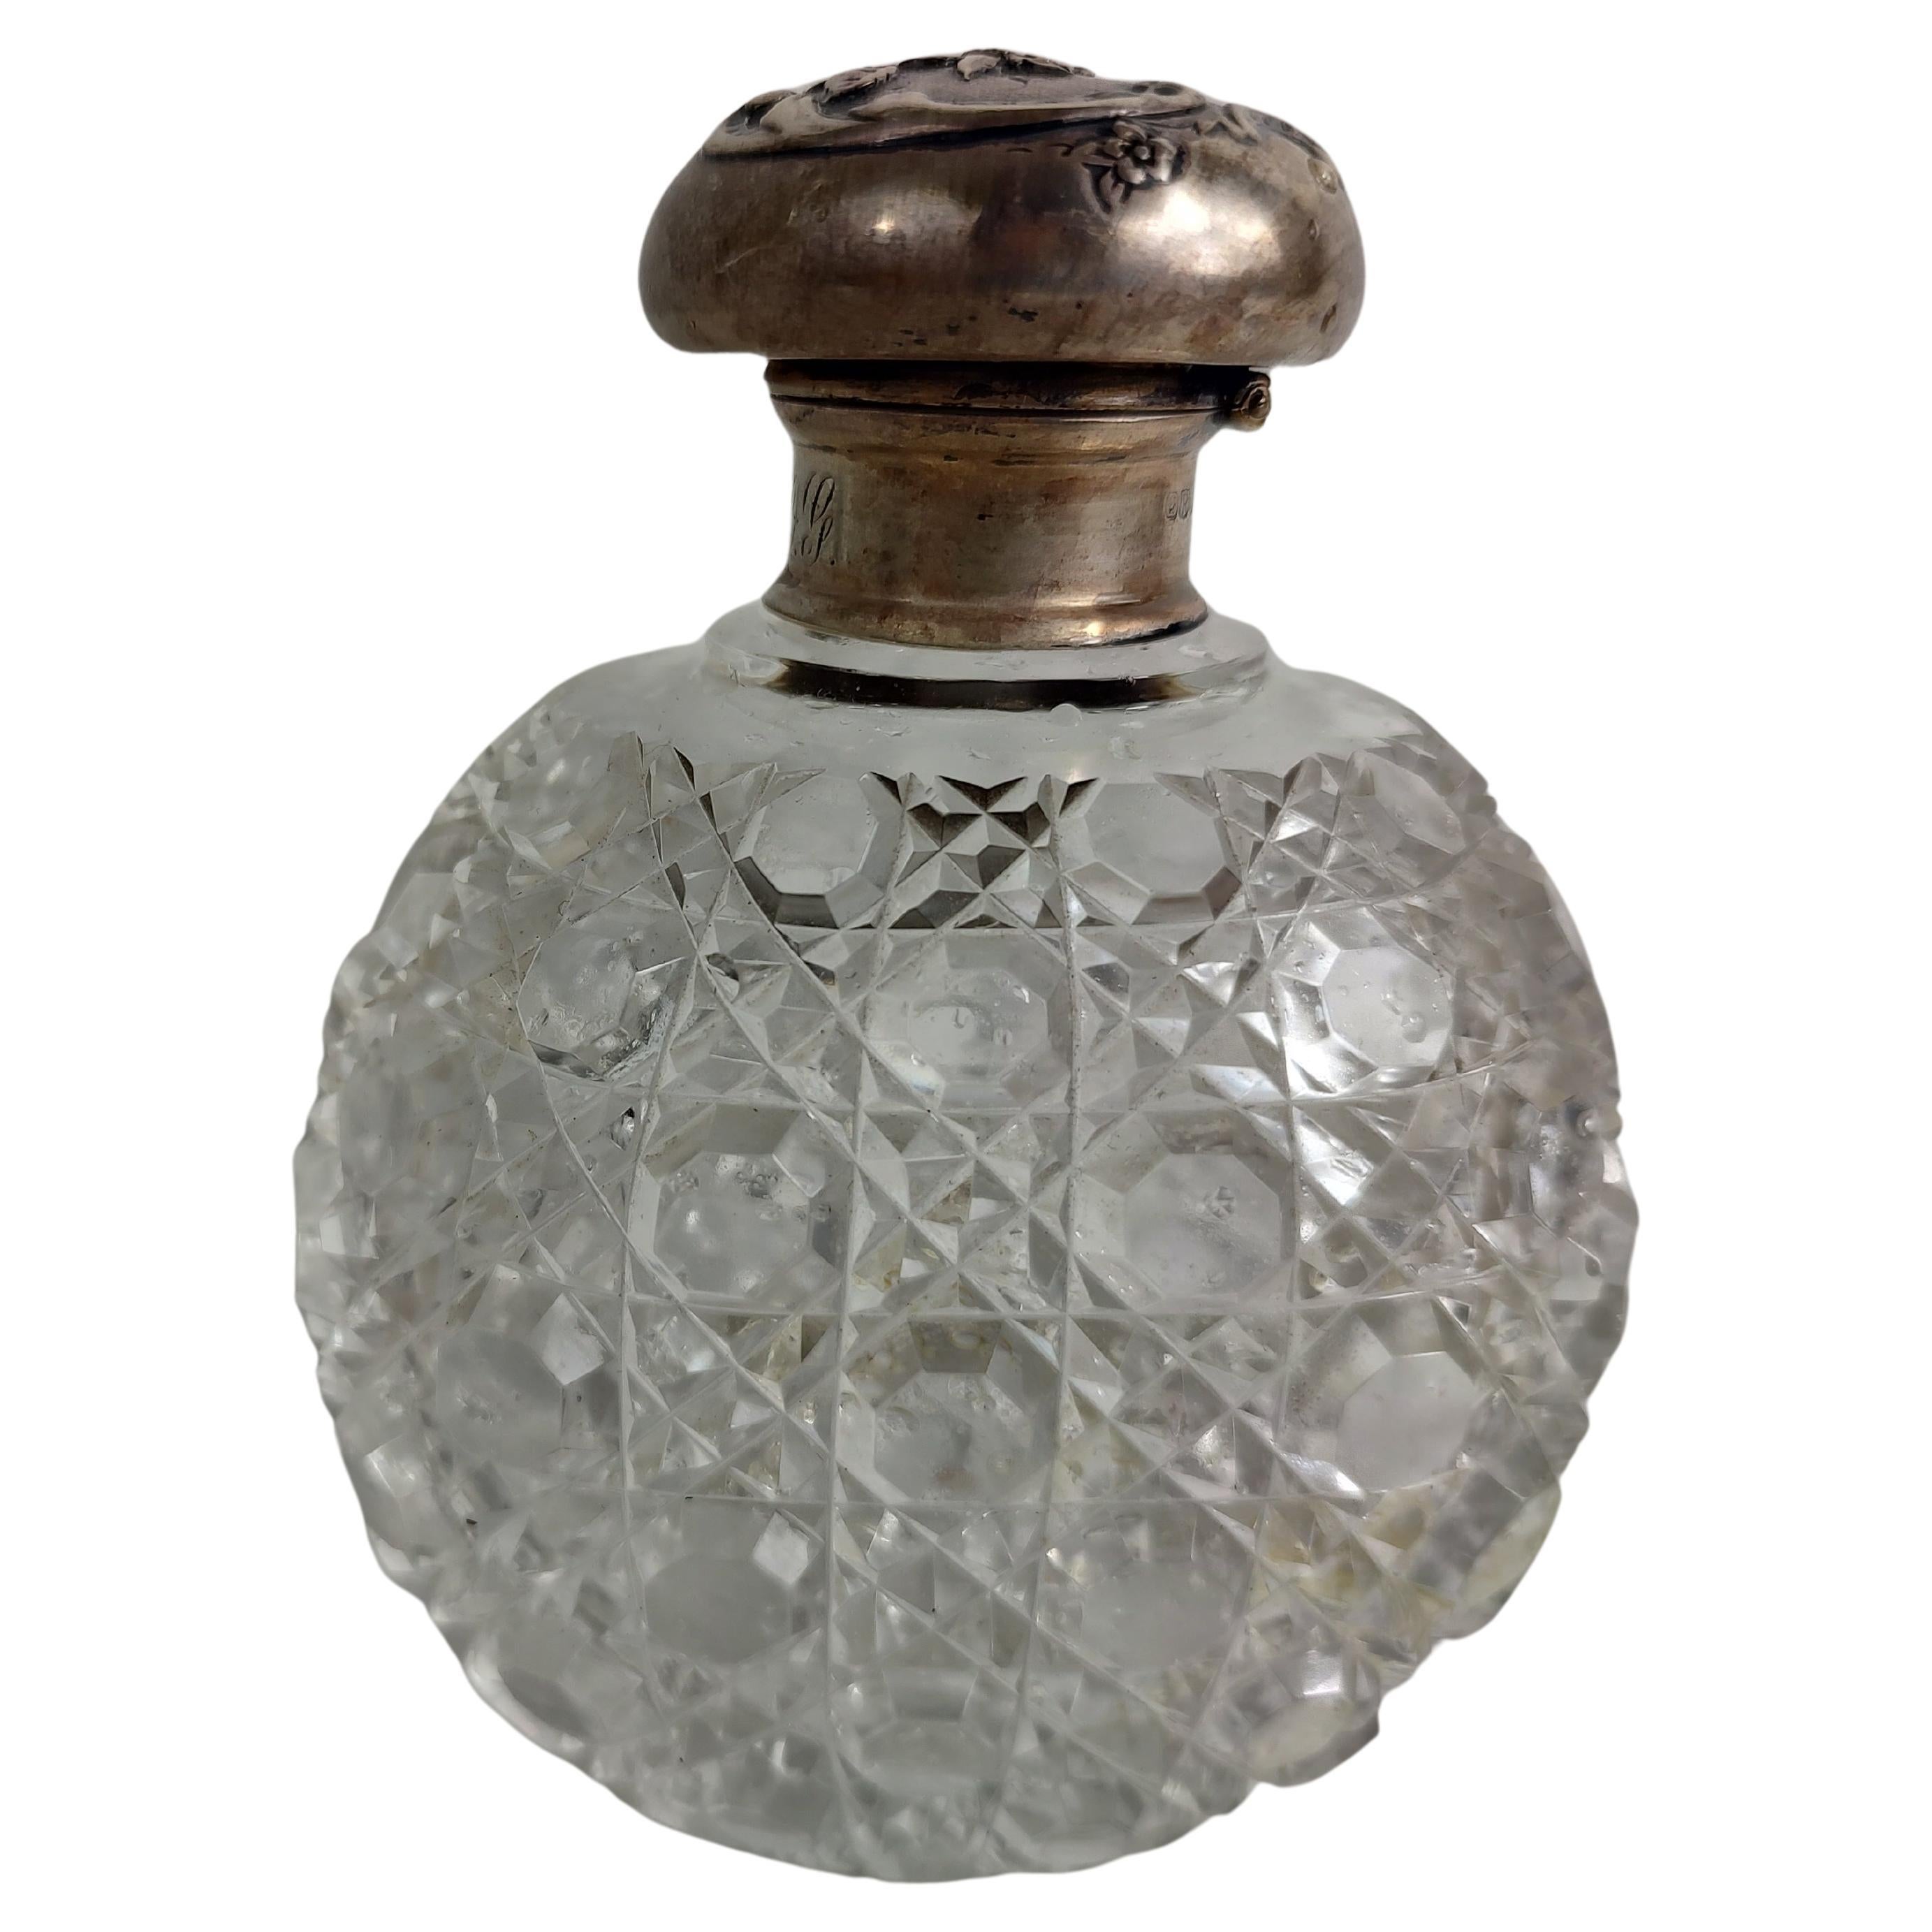 Fabulous heavy brilliant cut glass perfume bottle with sterling silver top. Has a glass stopper as well. In excellent antique condition with minimal wear. Marked sterling with hallmarks. Unpolished.